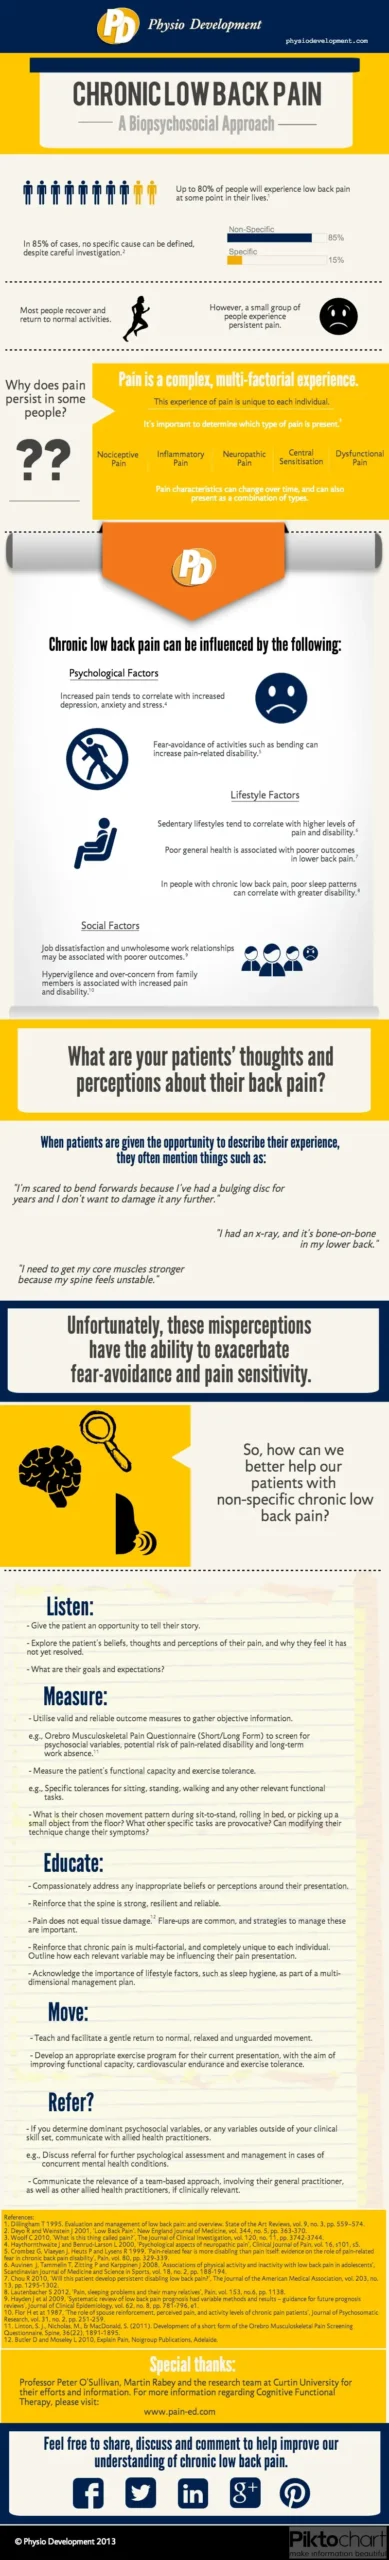 Chronic Low Back Pain Signs And Symptoms
